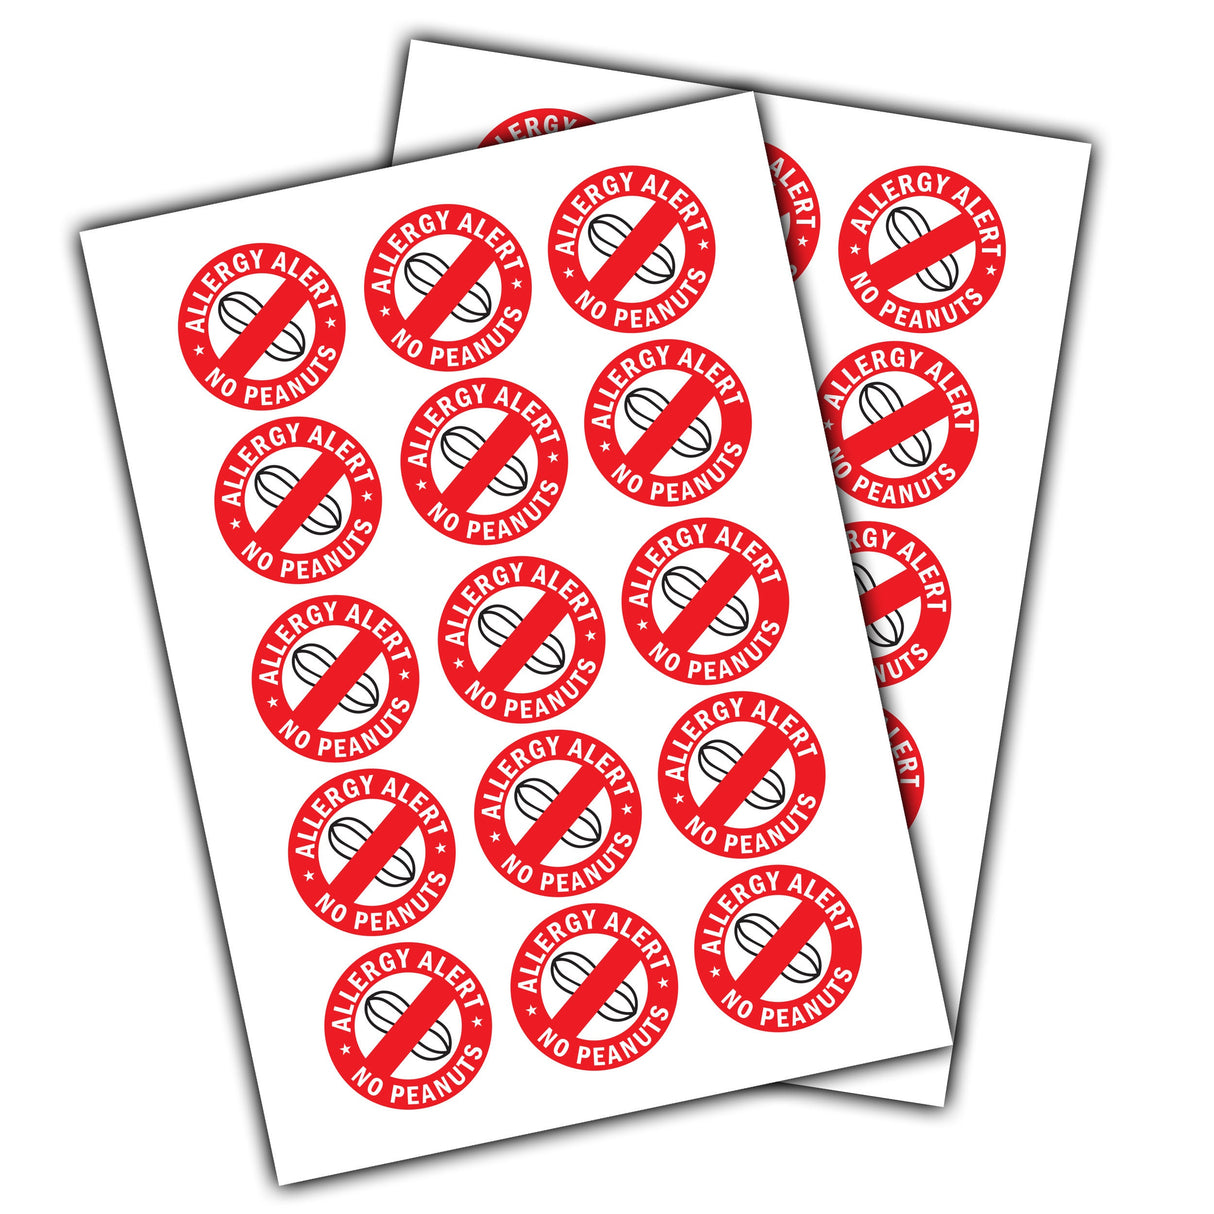 Allergy Alert Stickers - Peanut Sensitivity Warning Labels for Safety